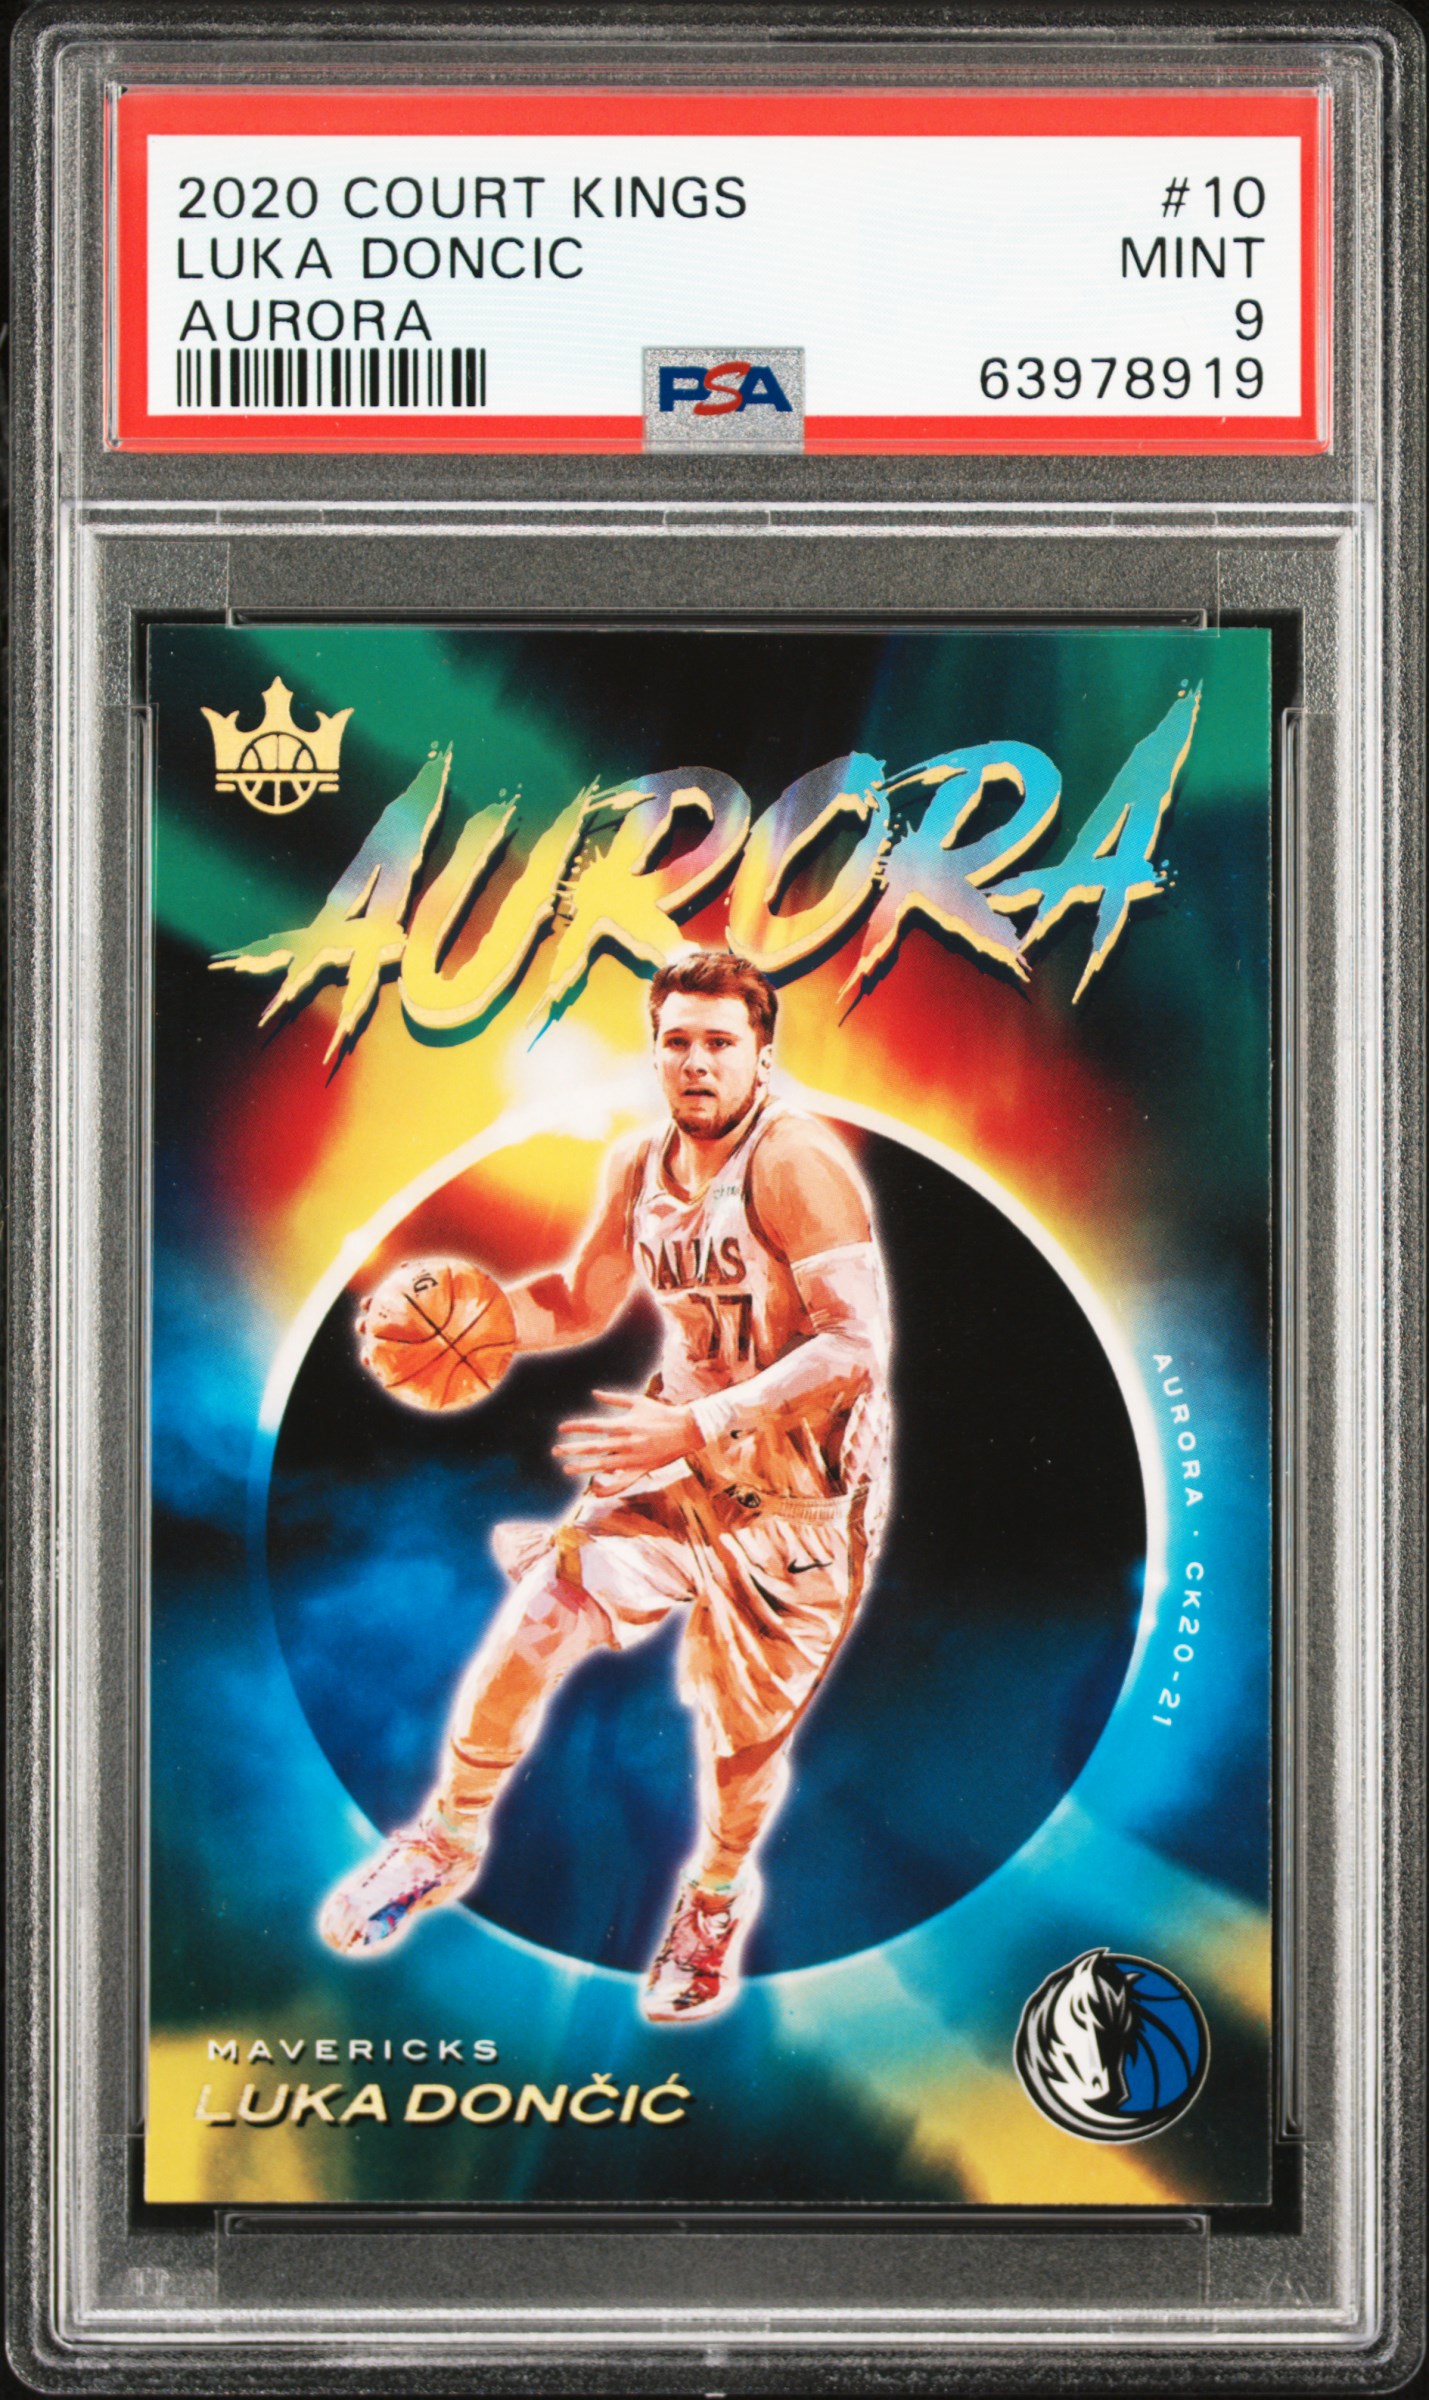 Luka Doncic 2020 Court Kings #10 Aurora /(SSP) Price Guide 